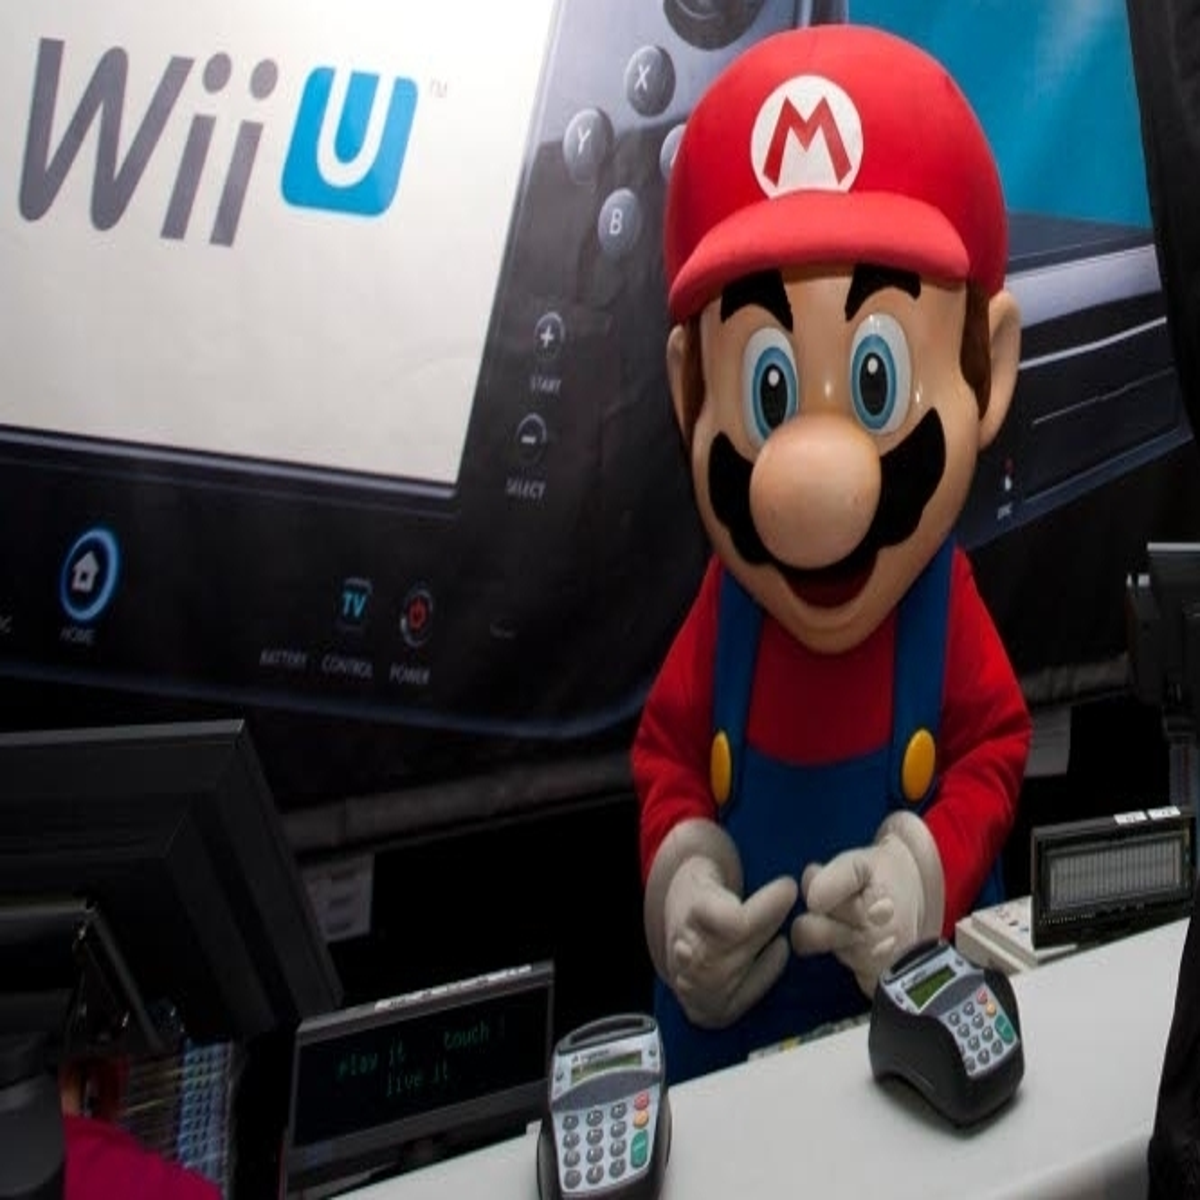 Nintendo just sold a brand new Wii U for the first time in over a year,  says analyst